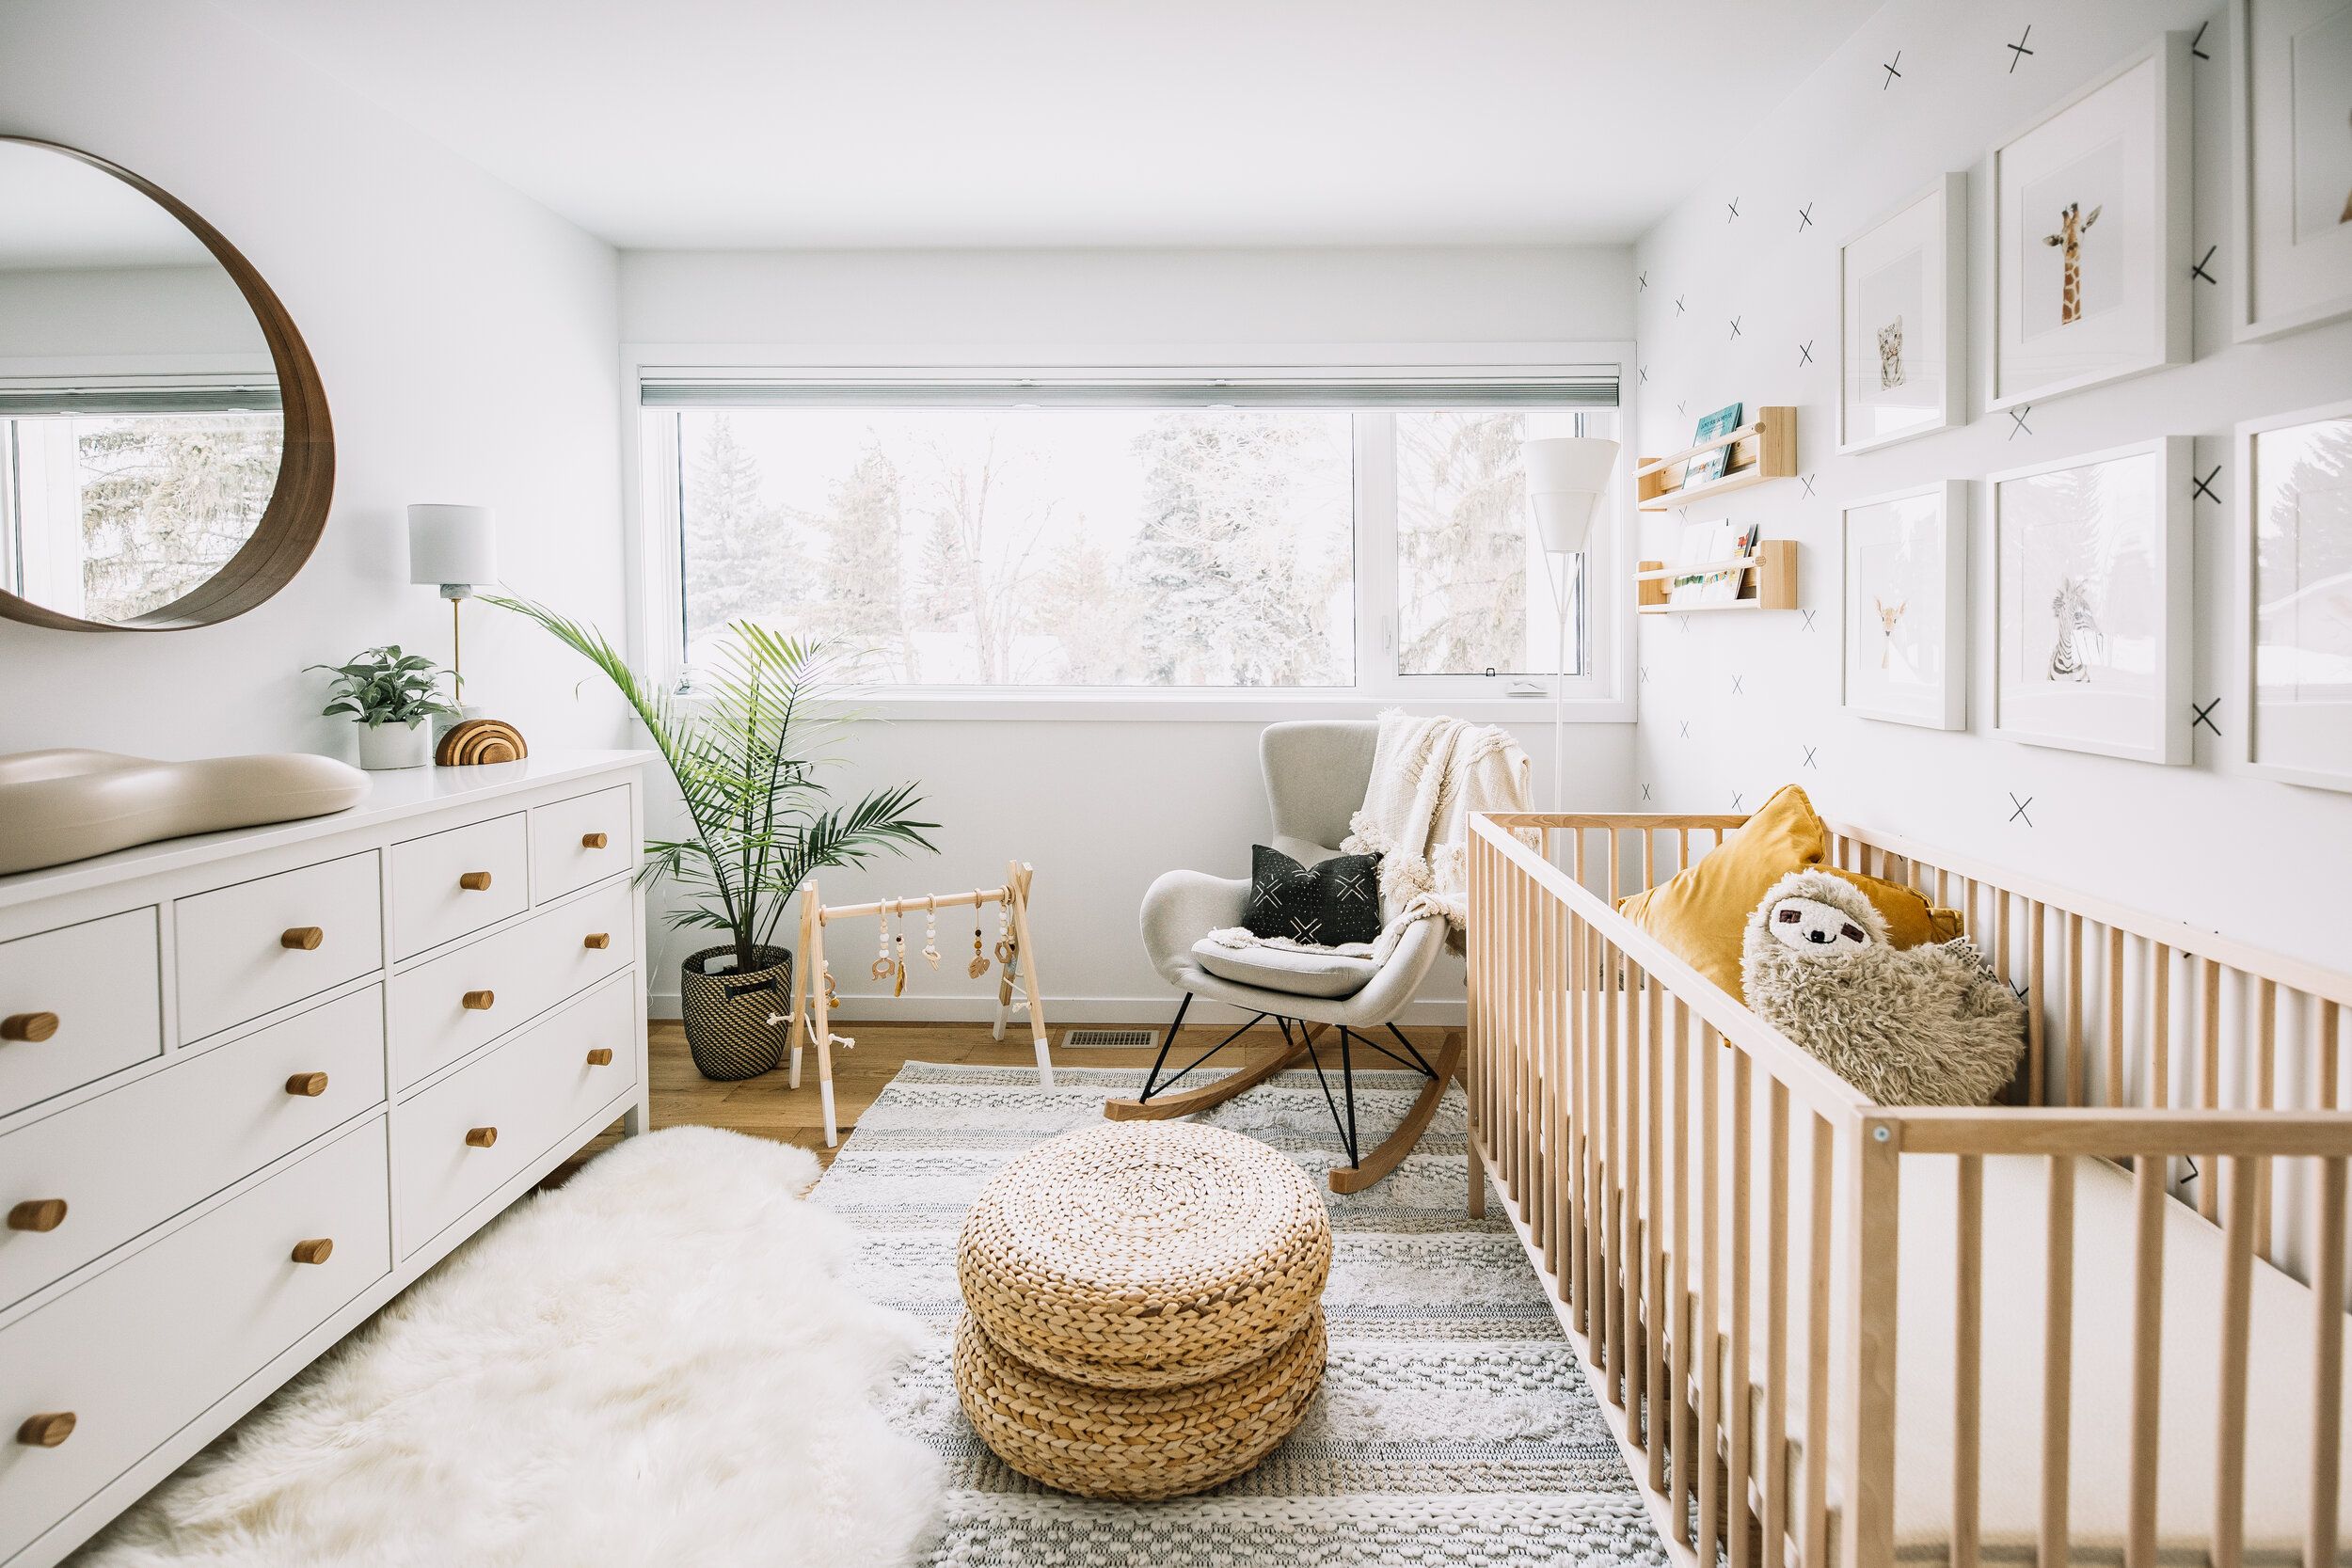 Decorate Your Baby’s Room